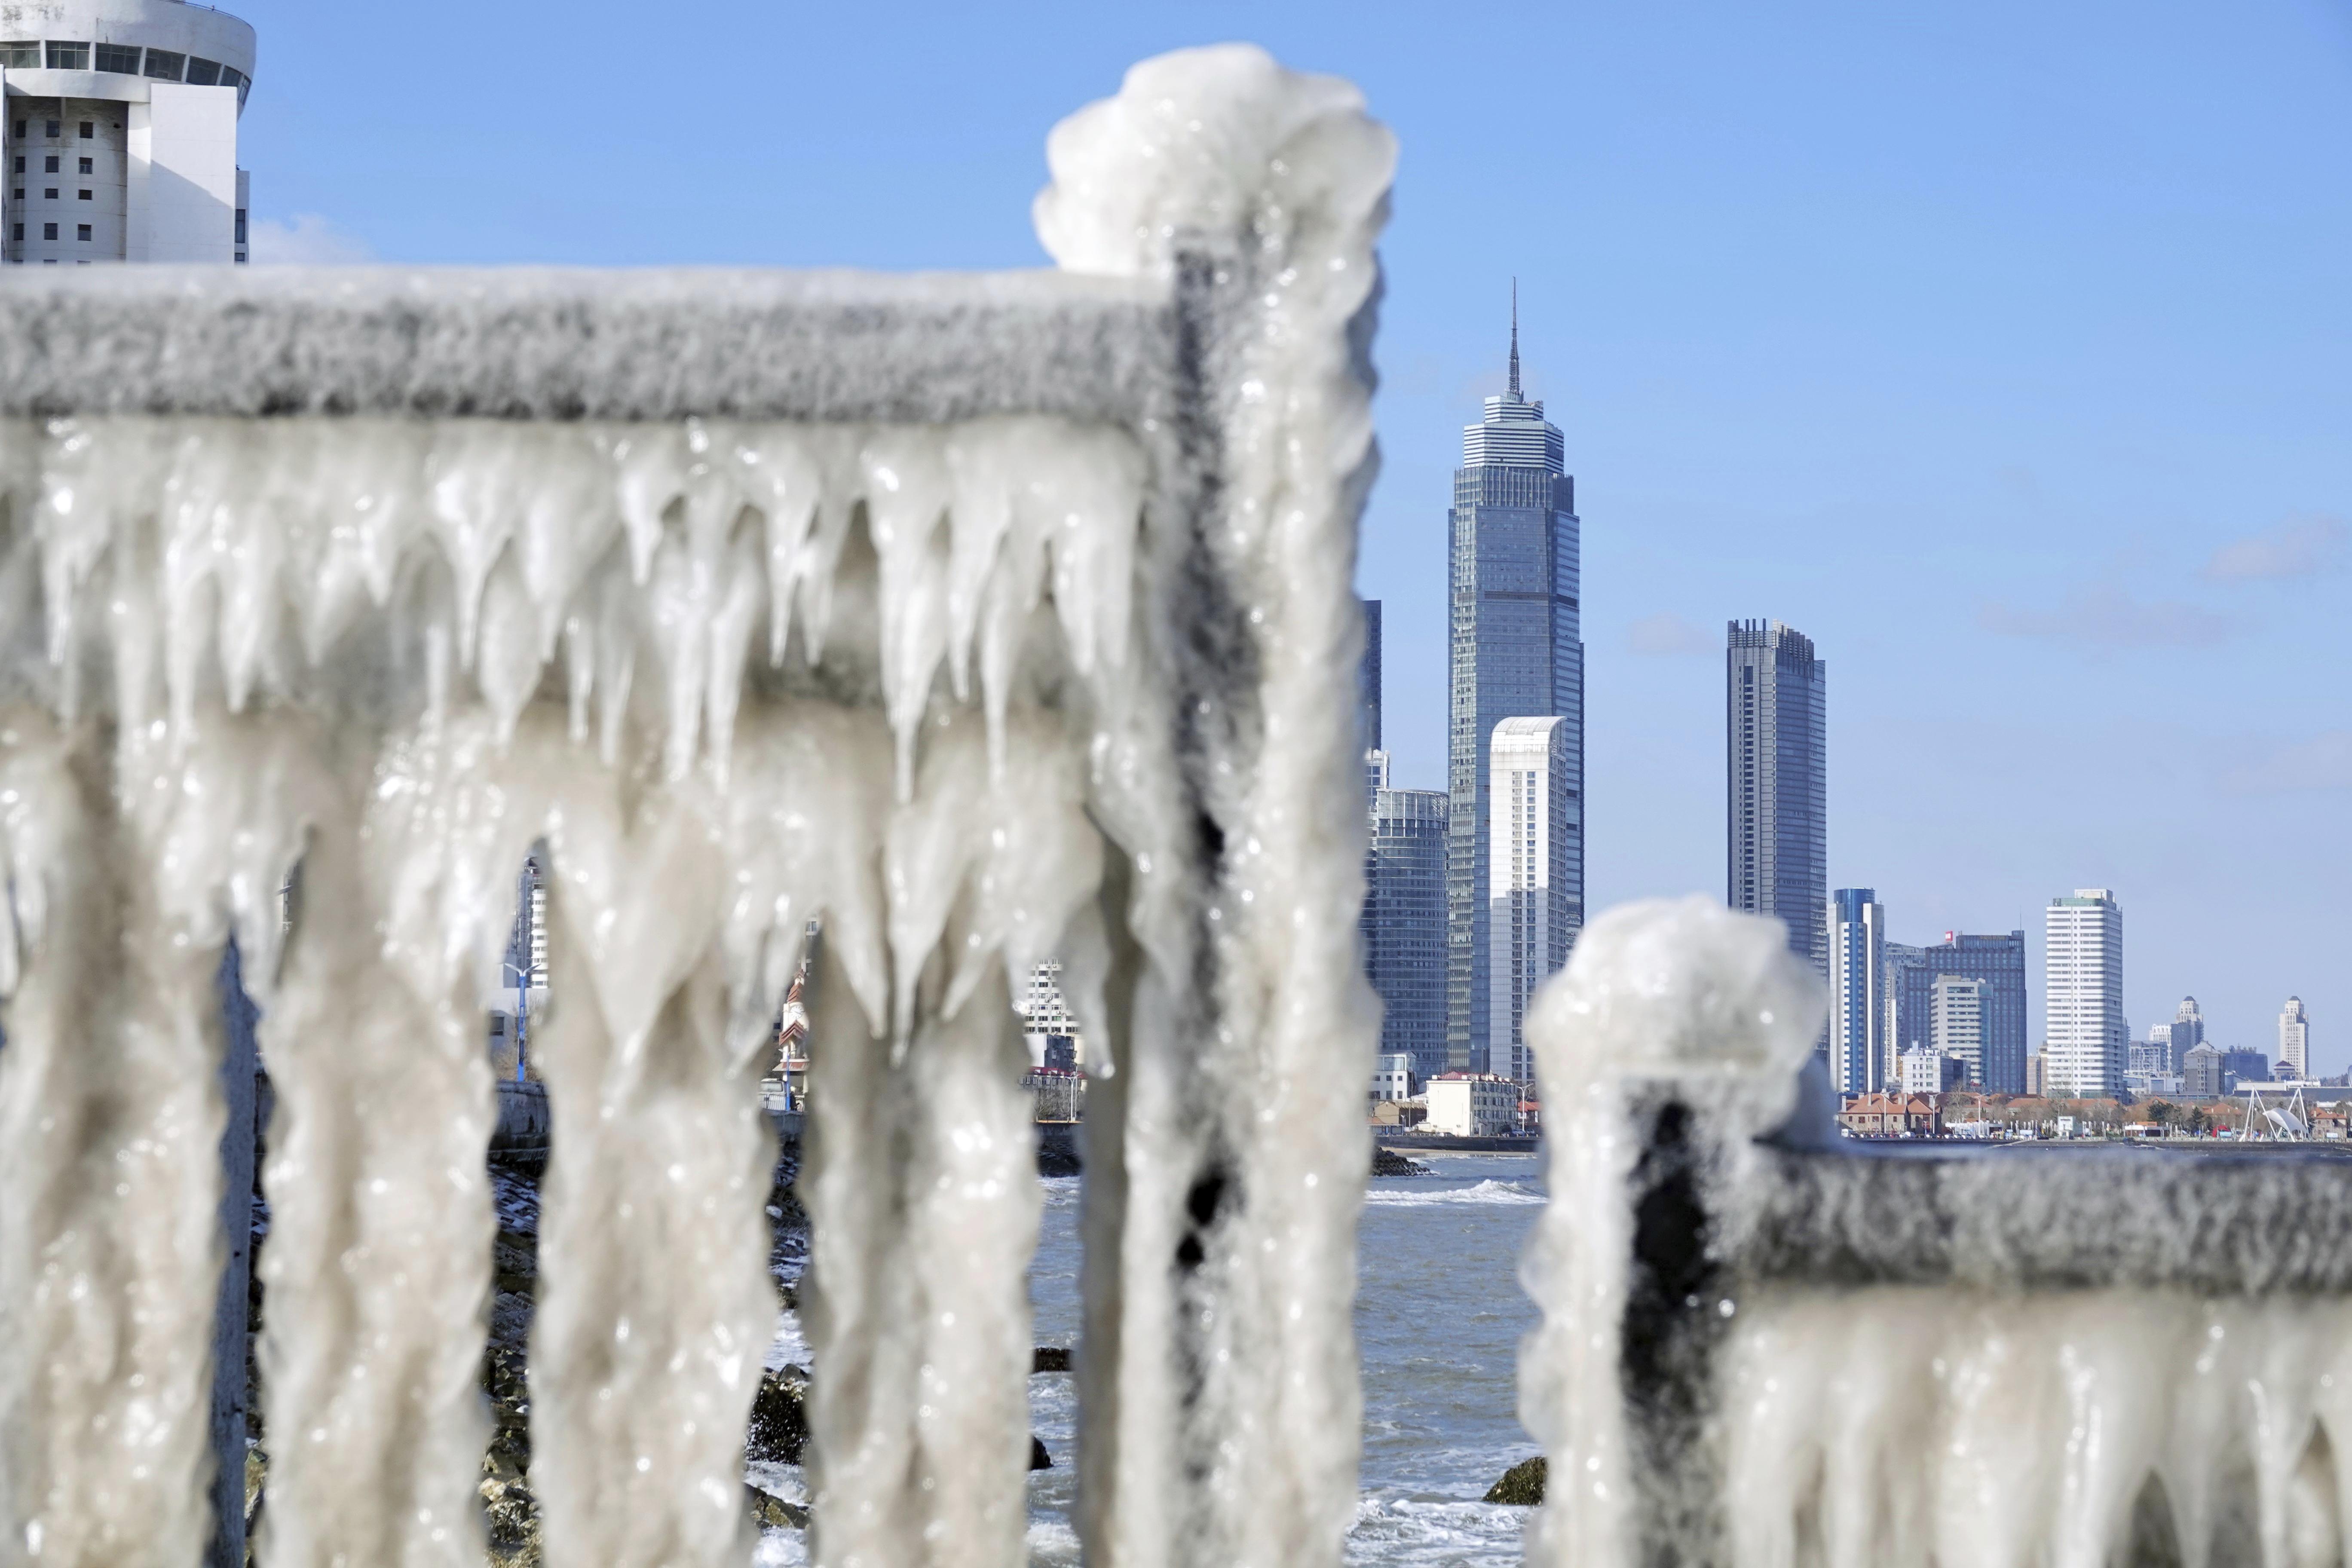 Freezing weather in China, Japan sets record low temperatures